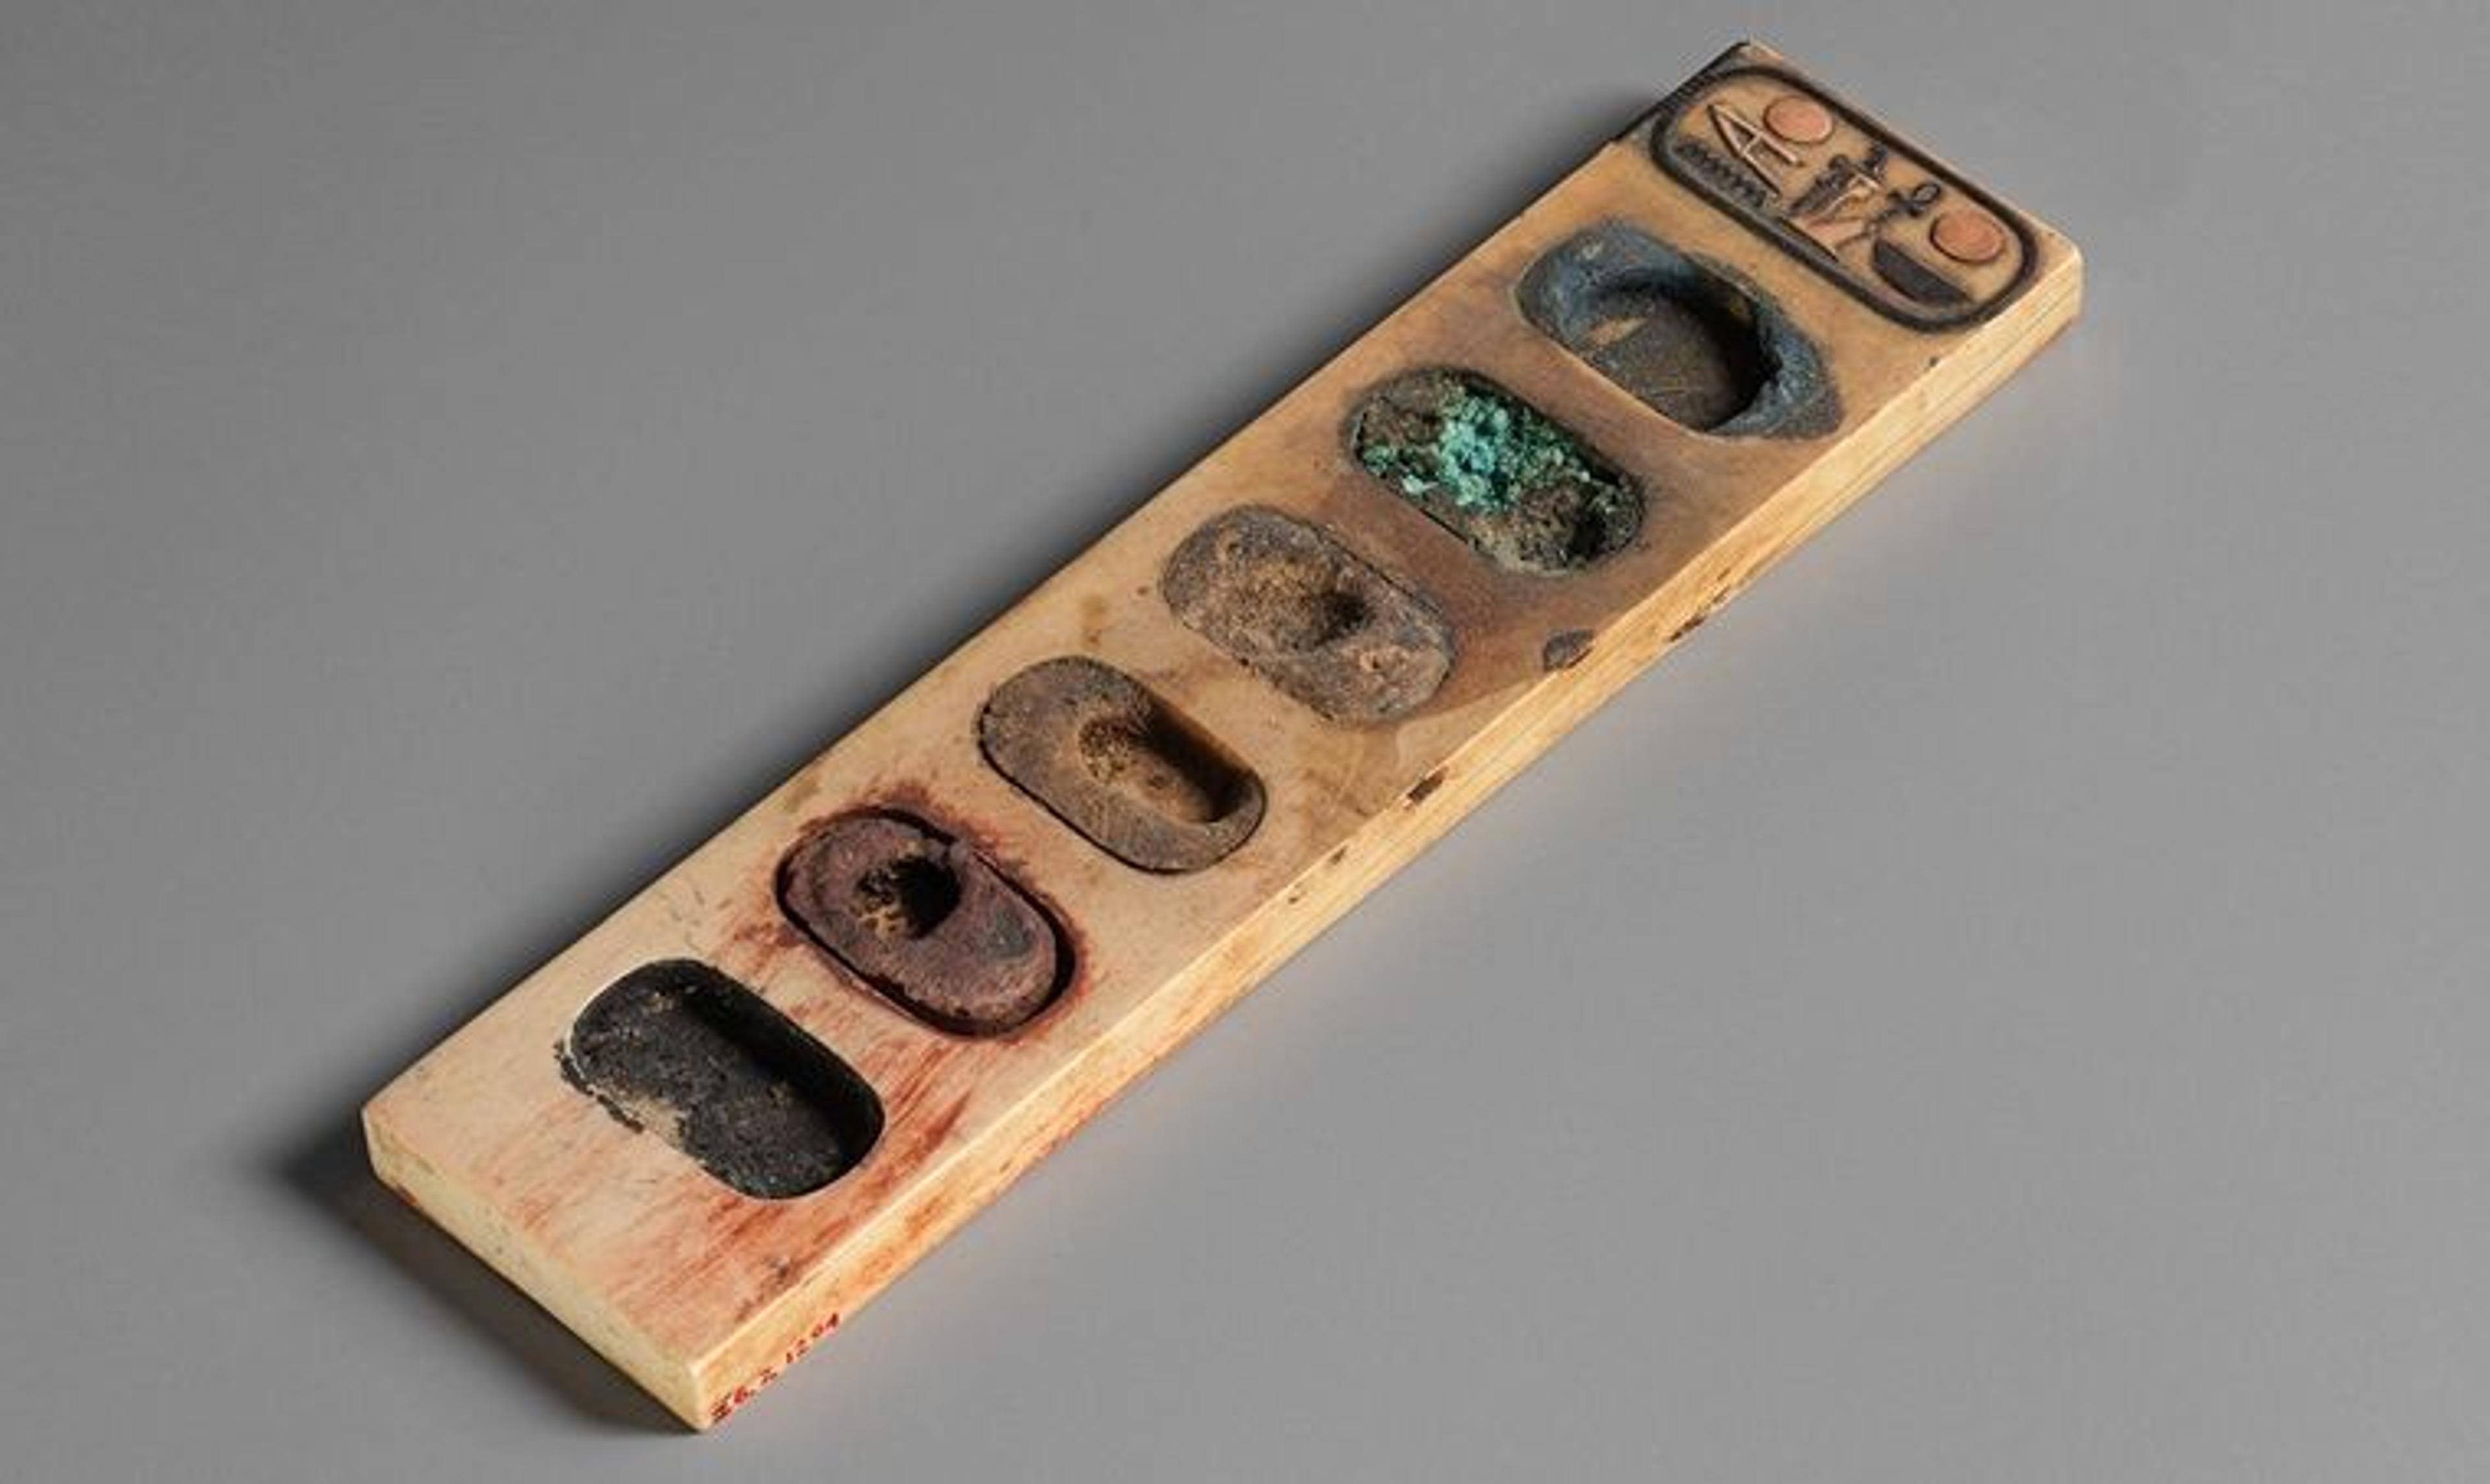 An ancient Egyptian painter's palette, with dried cakes of paint in each compartment.